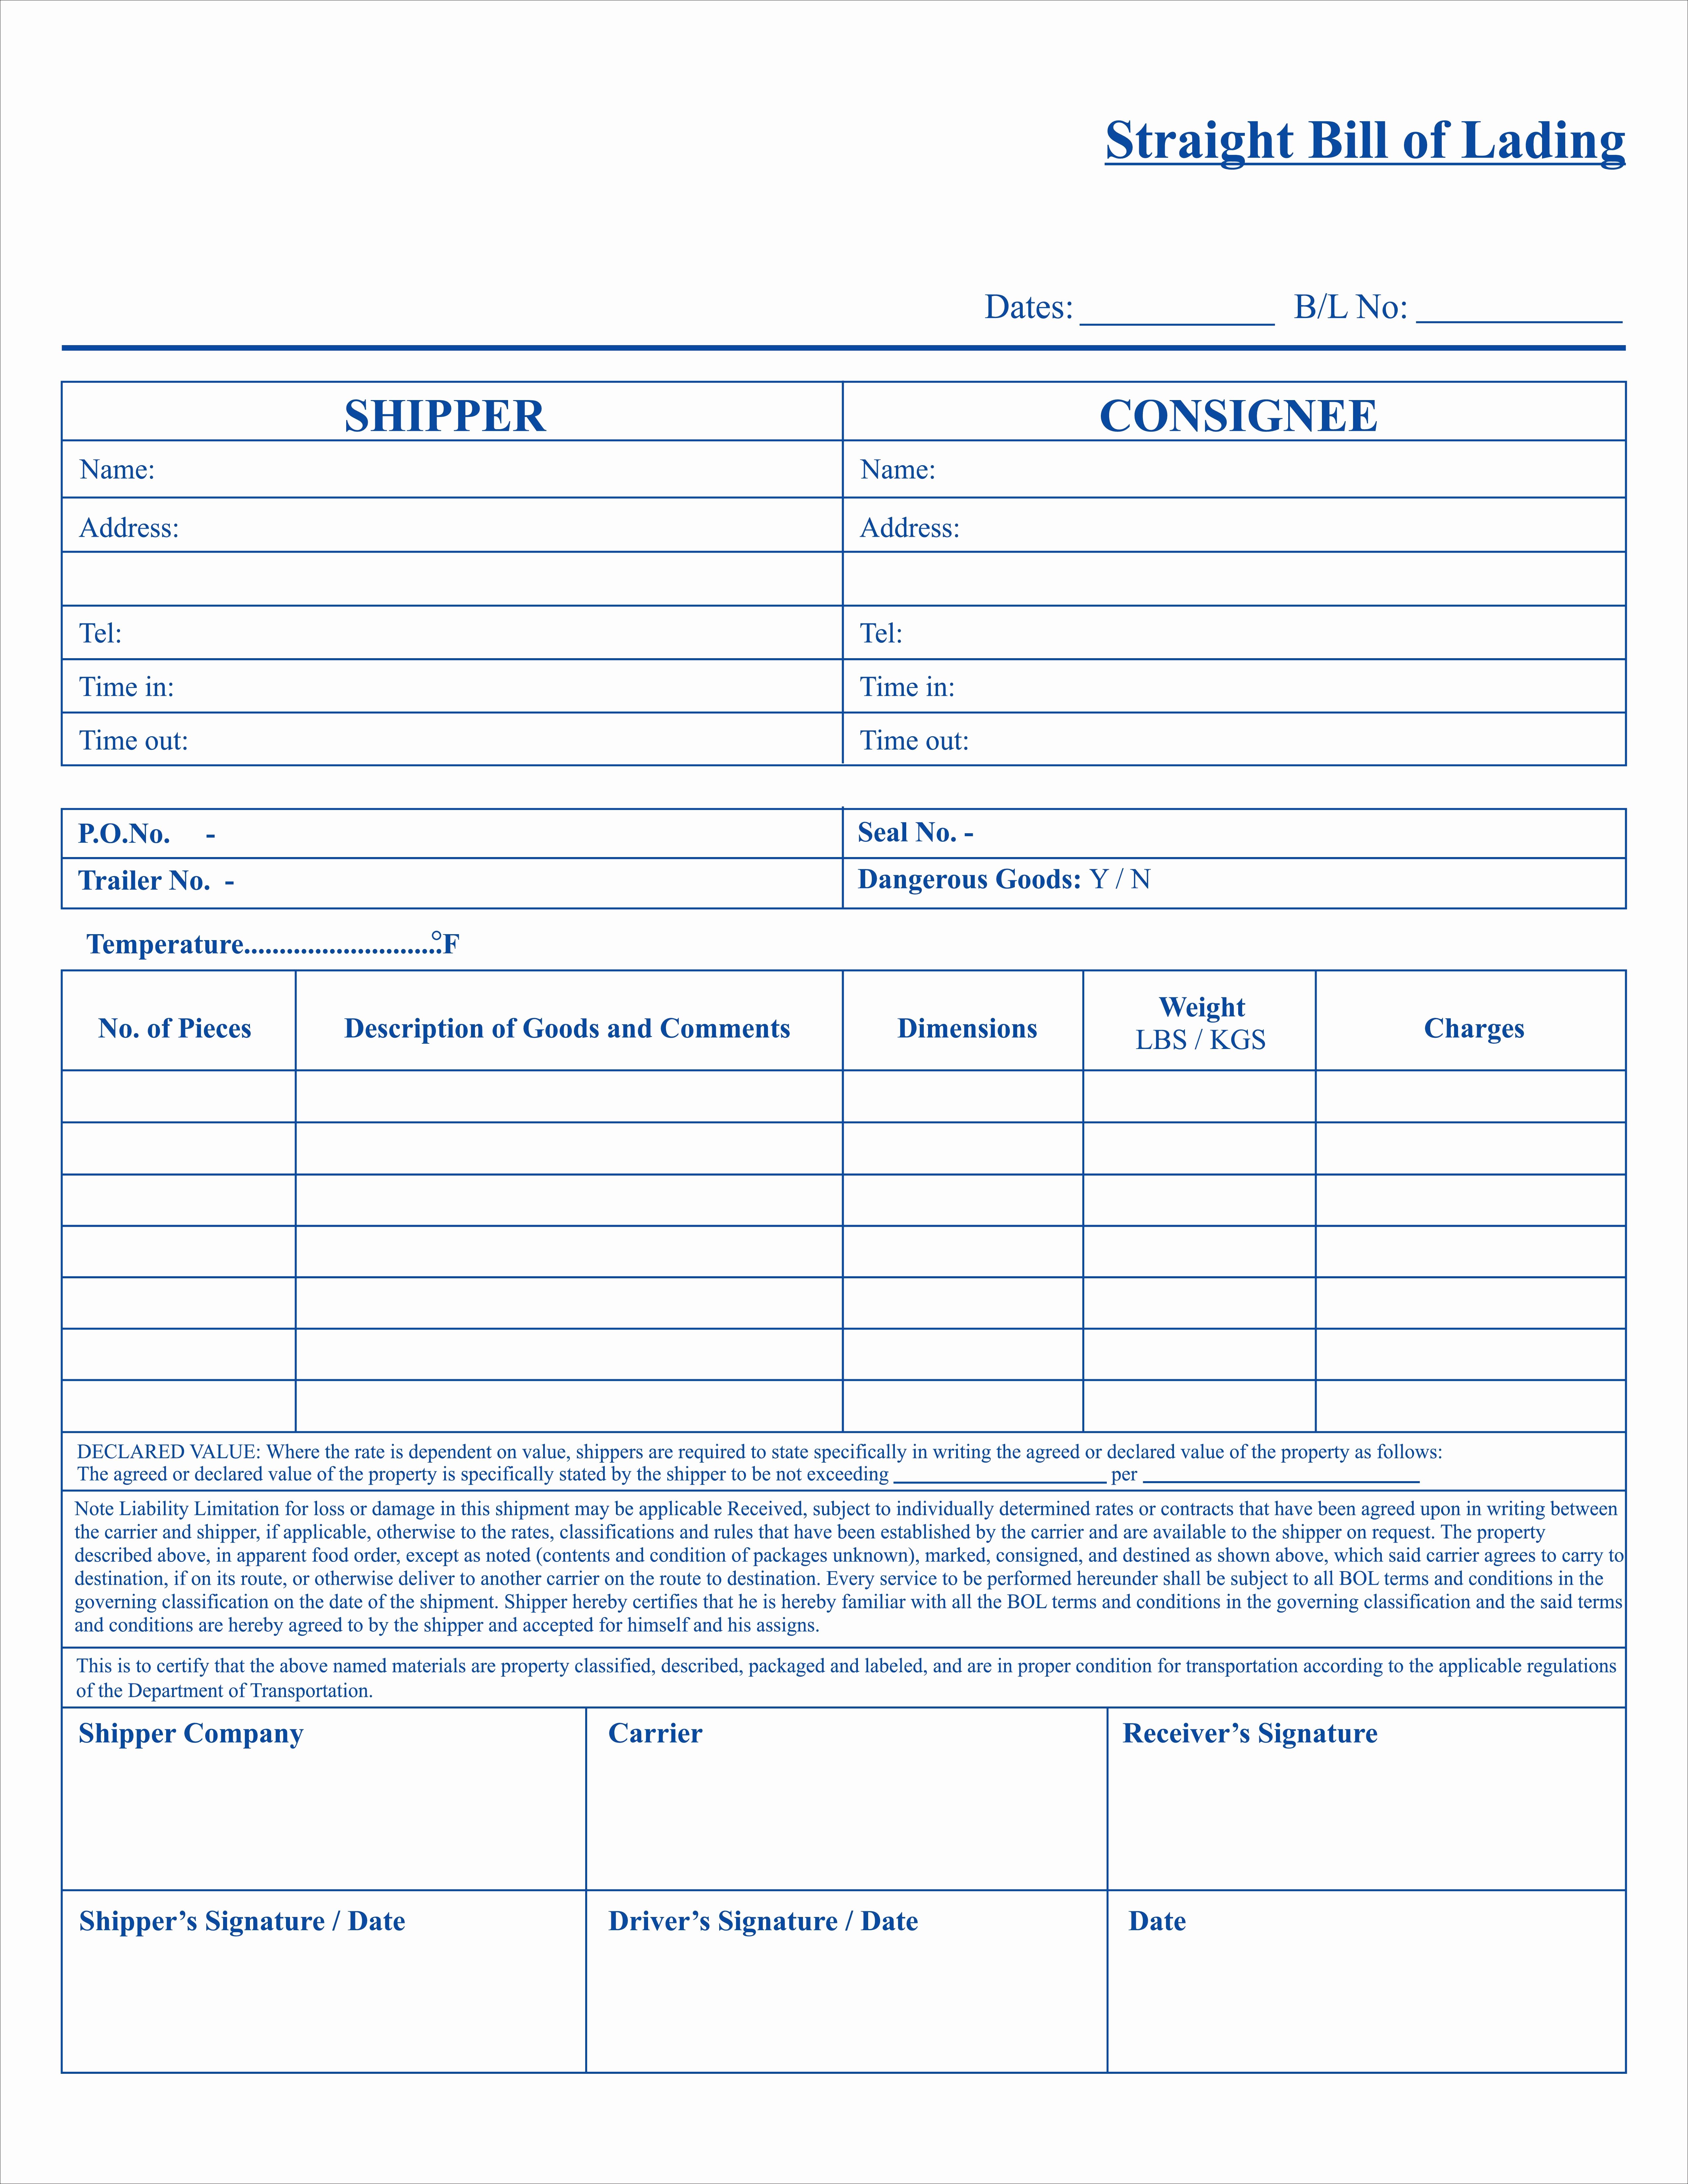 Straight Bill Of Lading Template Awesome Anthony Junior Printing solutions